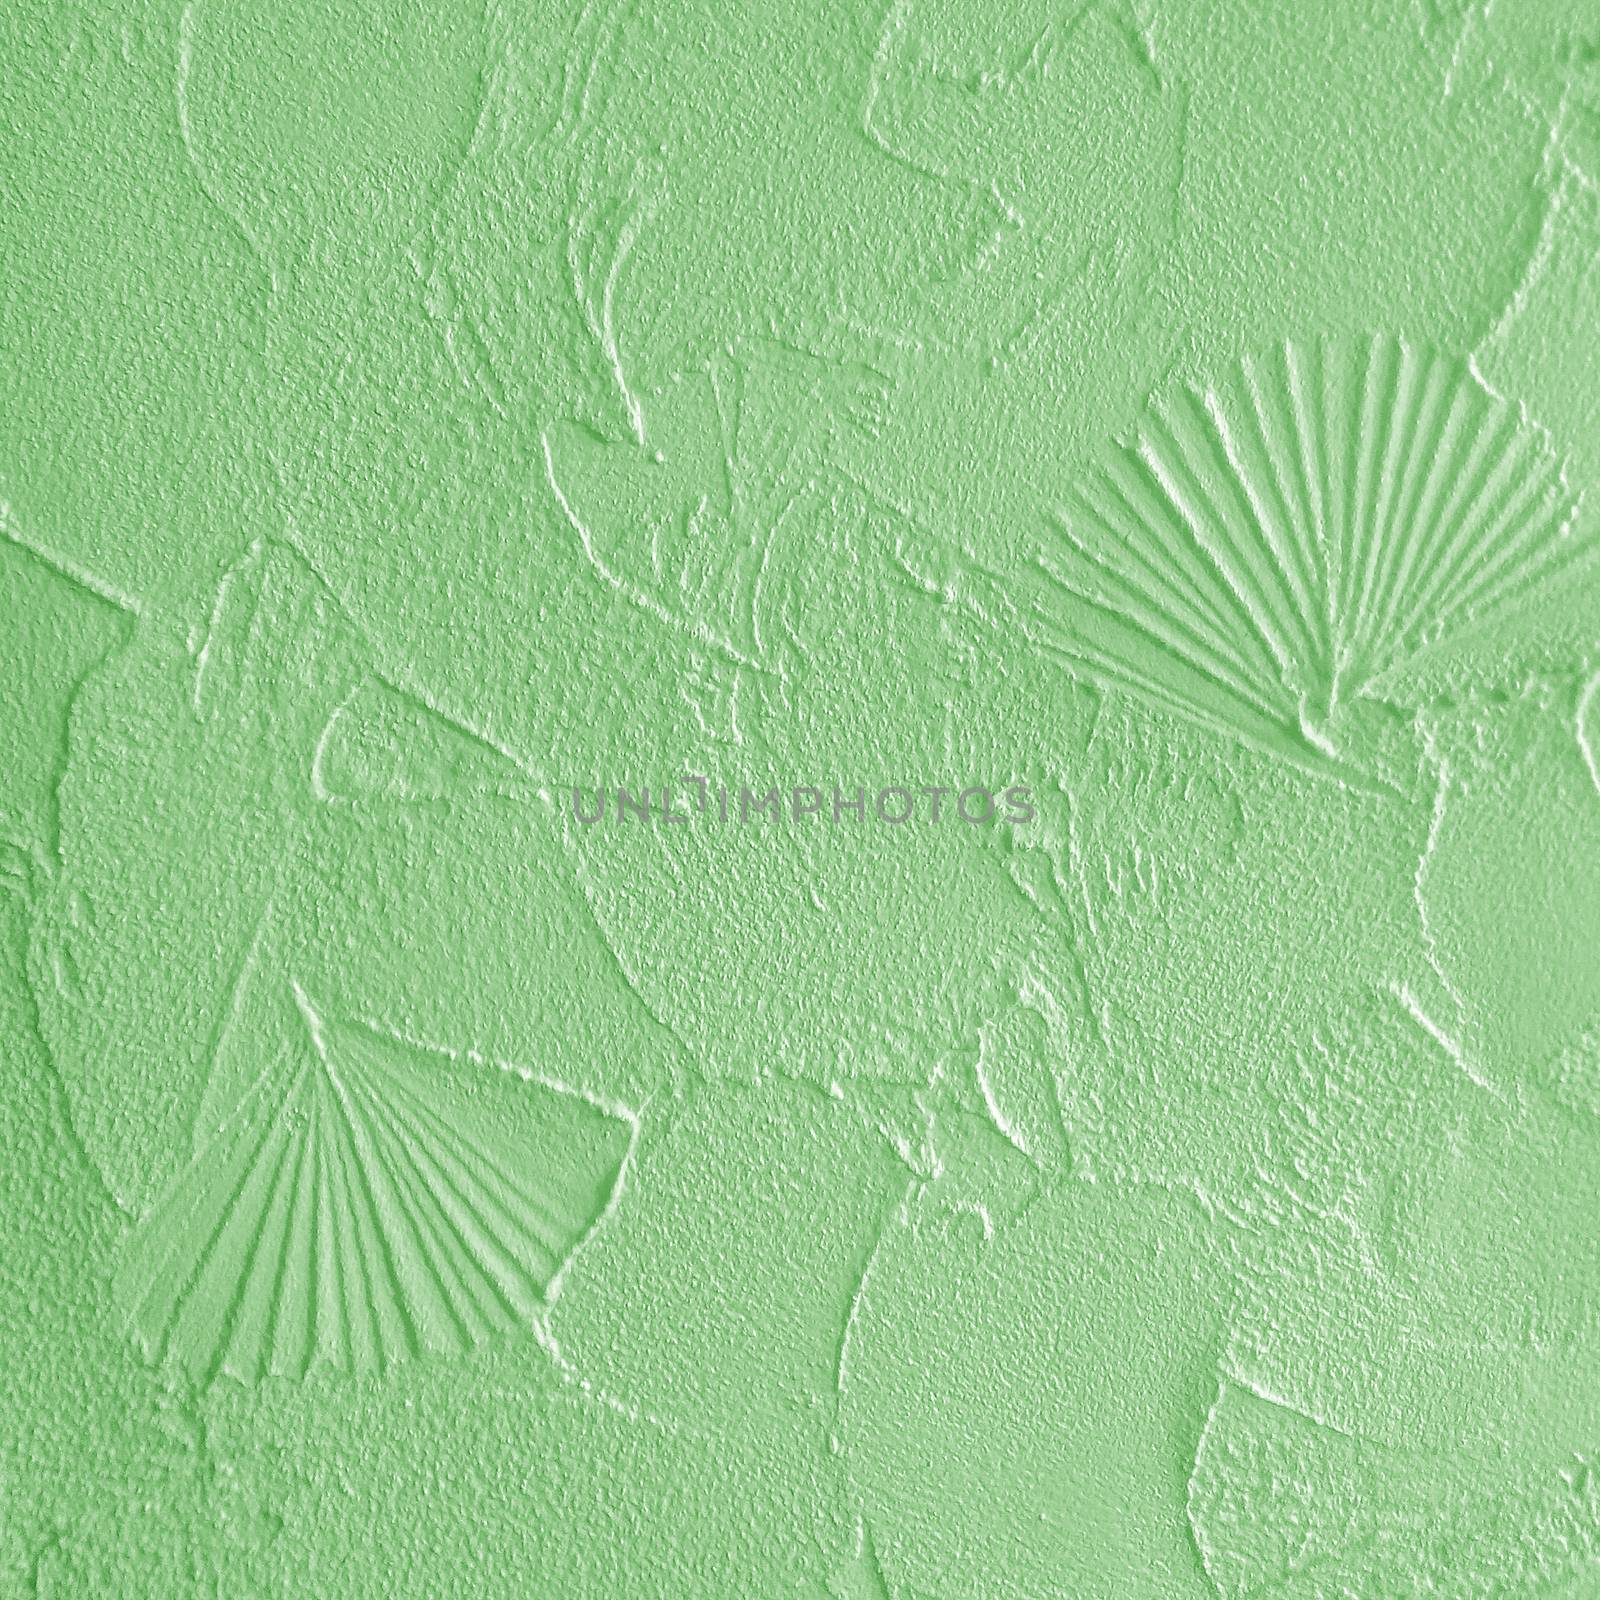 Structural plaster on wall - green by Venakr